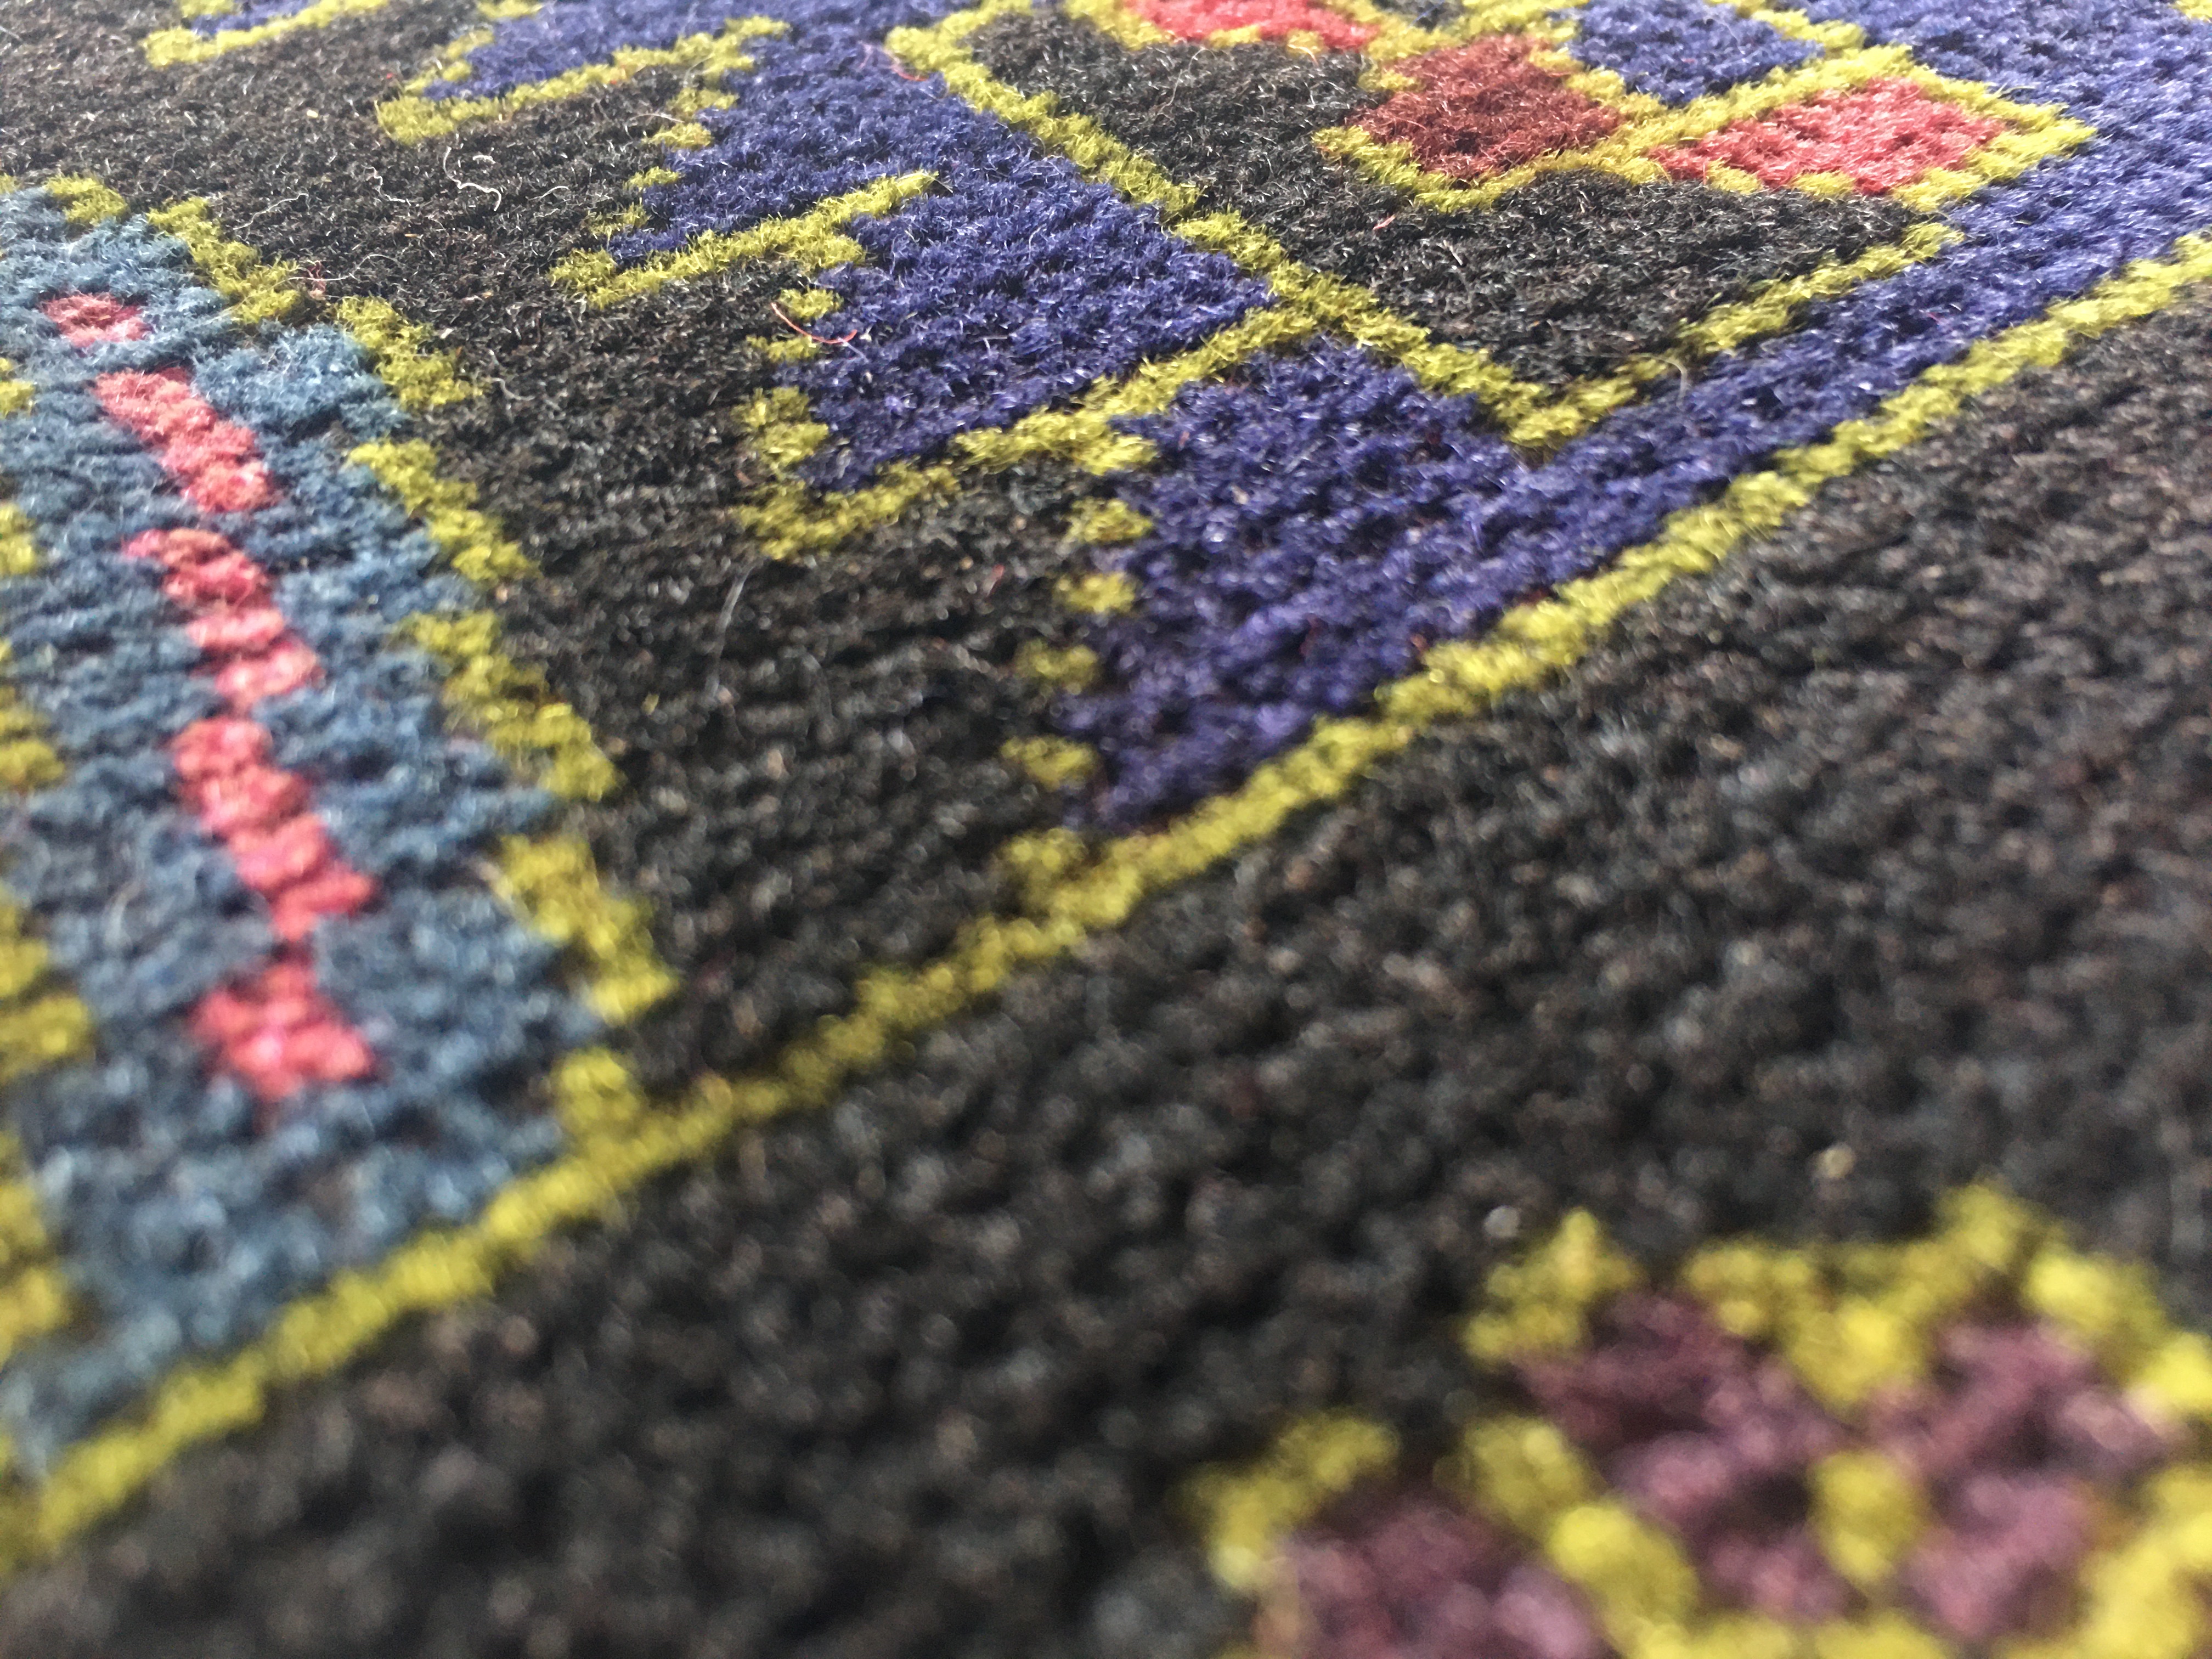 Photo looking cross the rug at different dye colors